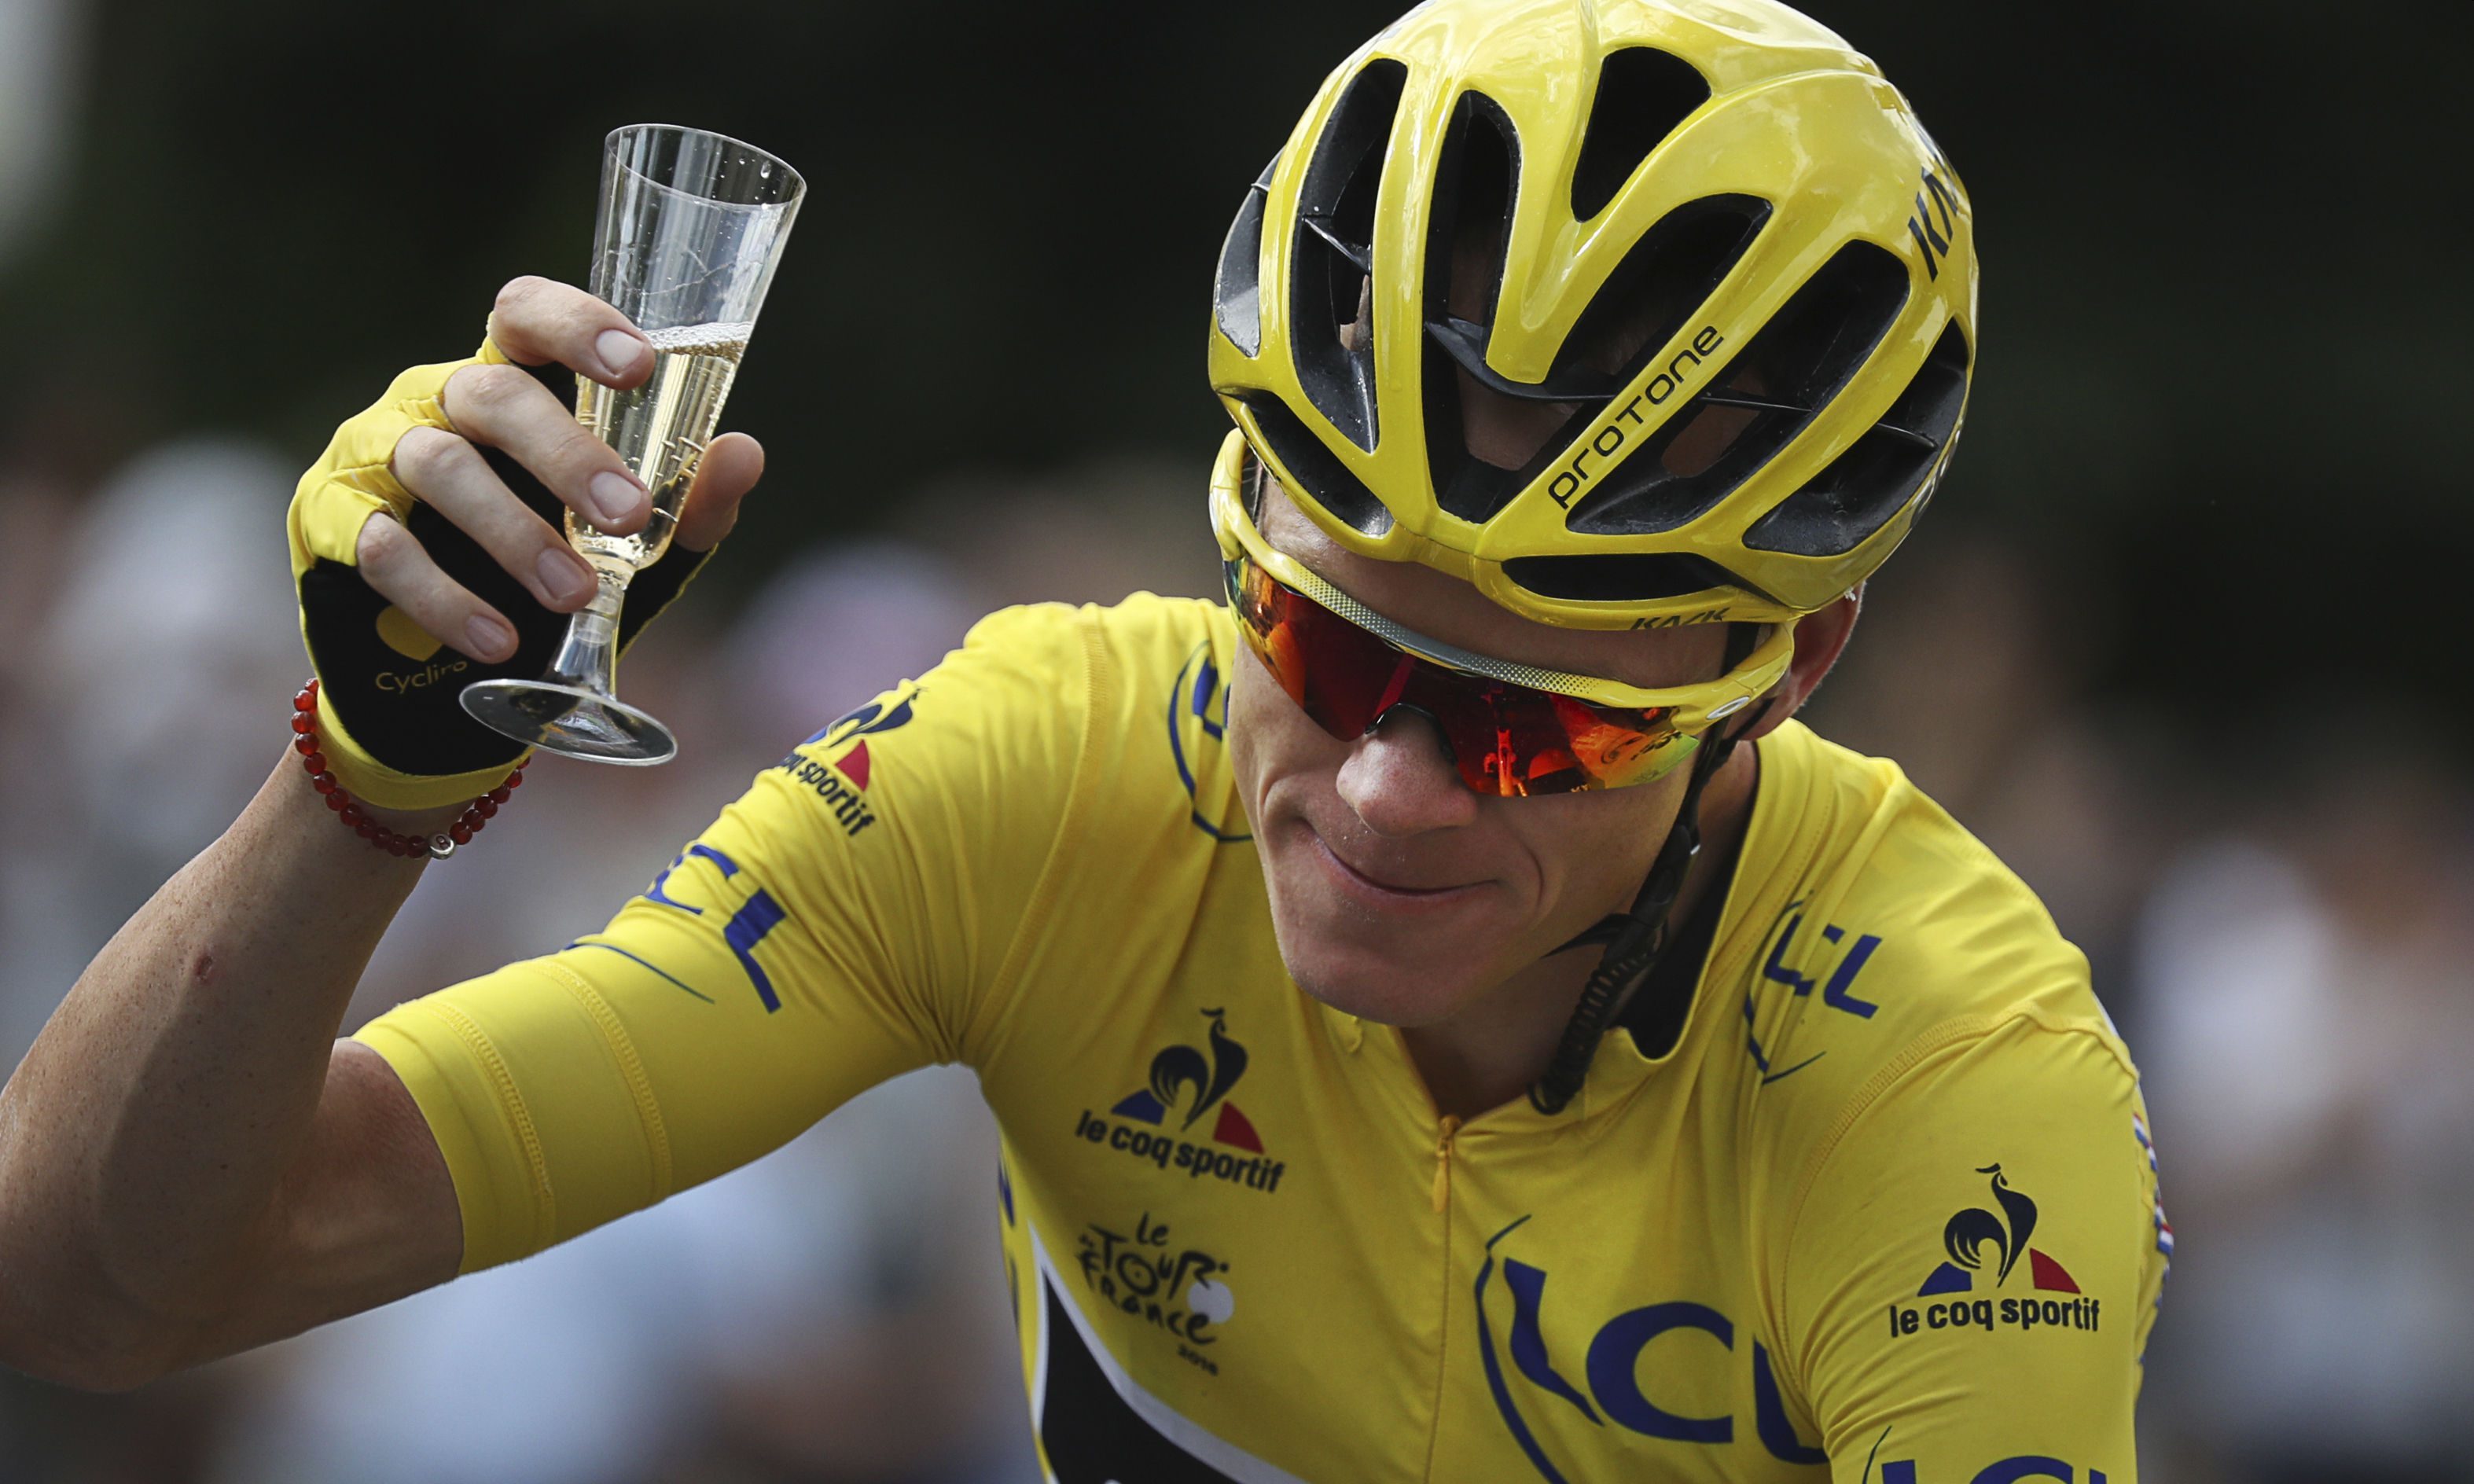 Are the champagne days of the Tour de France over?